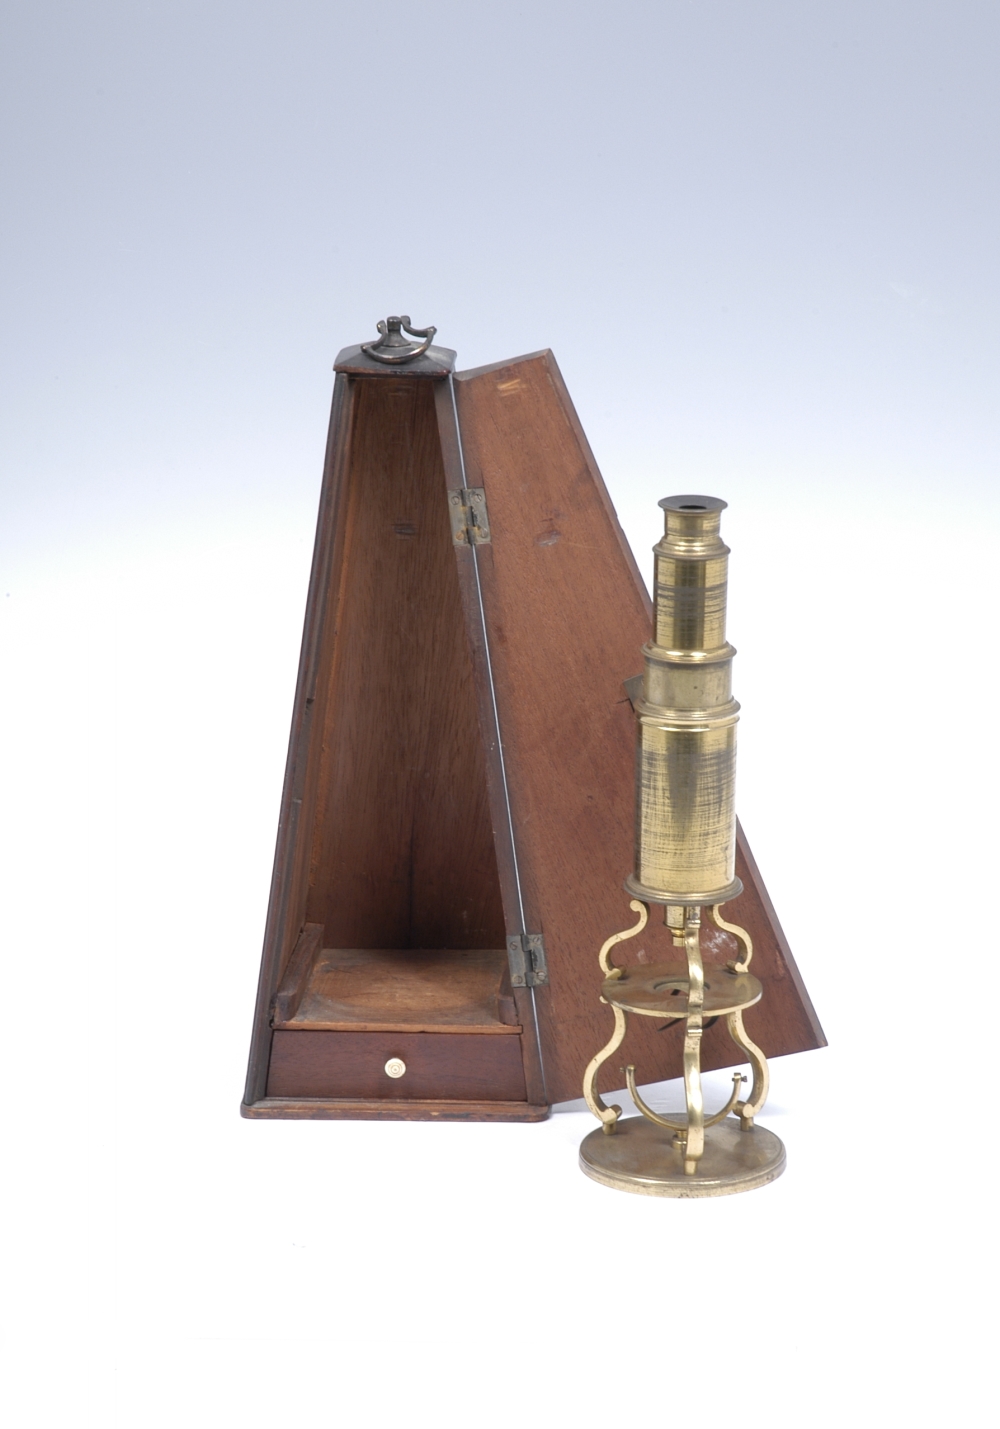 preview image for Culpeper Type Microscope in Case with Accessories